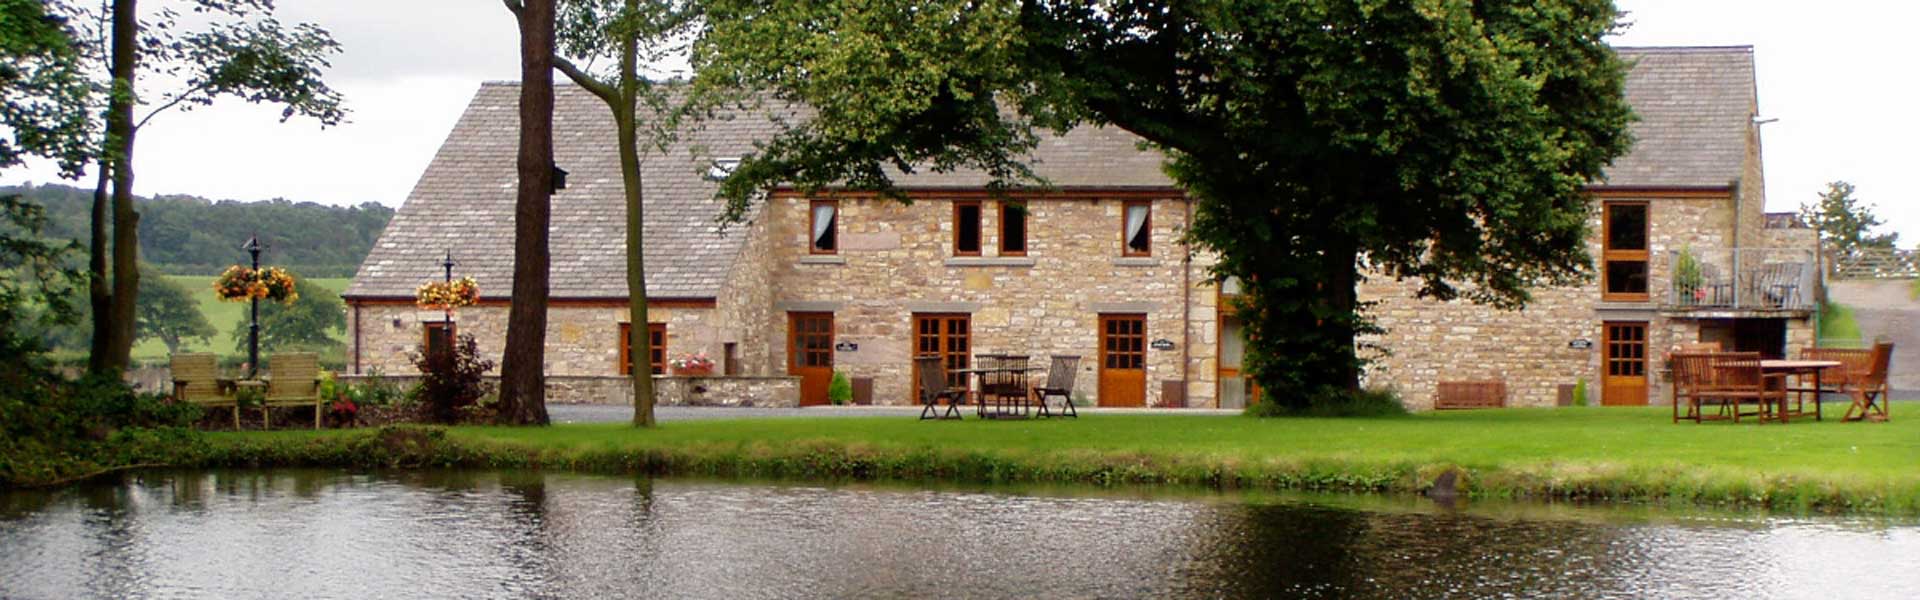 self catering cottages lancaster